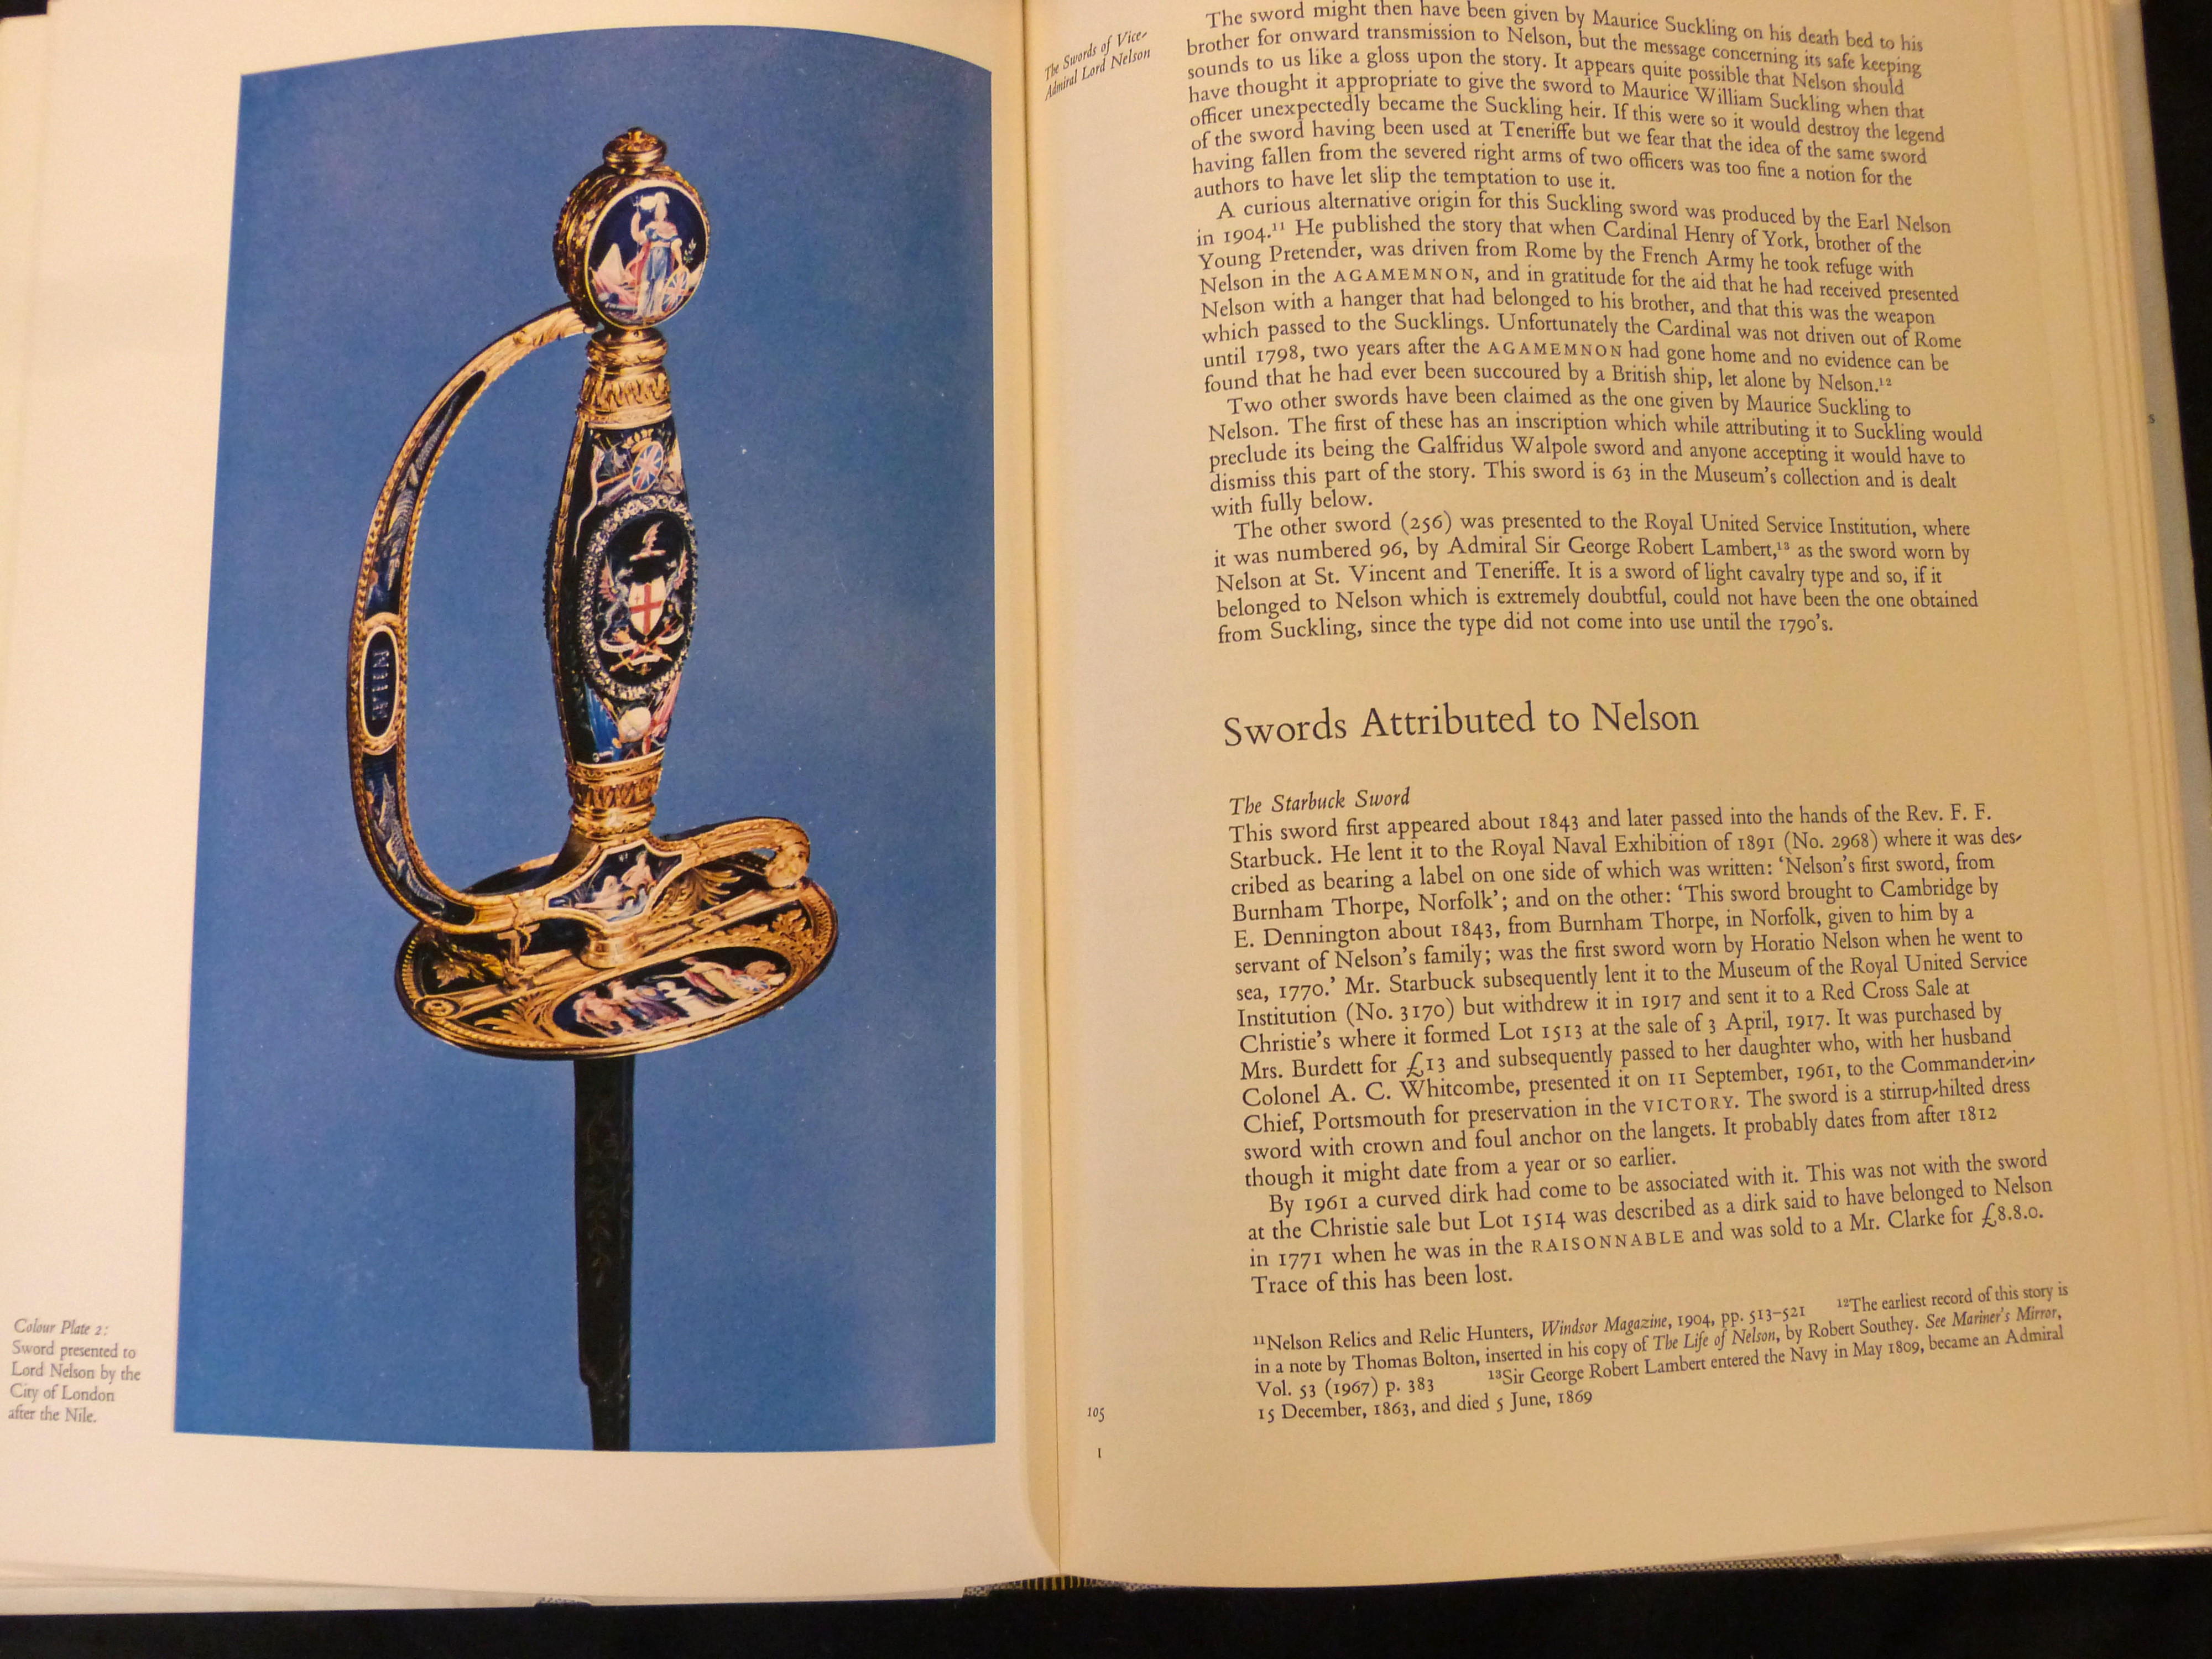 WILLIAM EDWARD MAY & PHILIP GEOFFRY WALTER ANNIS: SWORDS FOR SEA SERVICE, London, HMSO, 1st edition, - Image 5 of 5